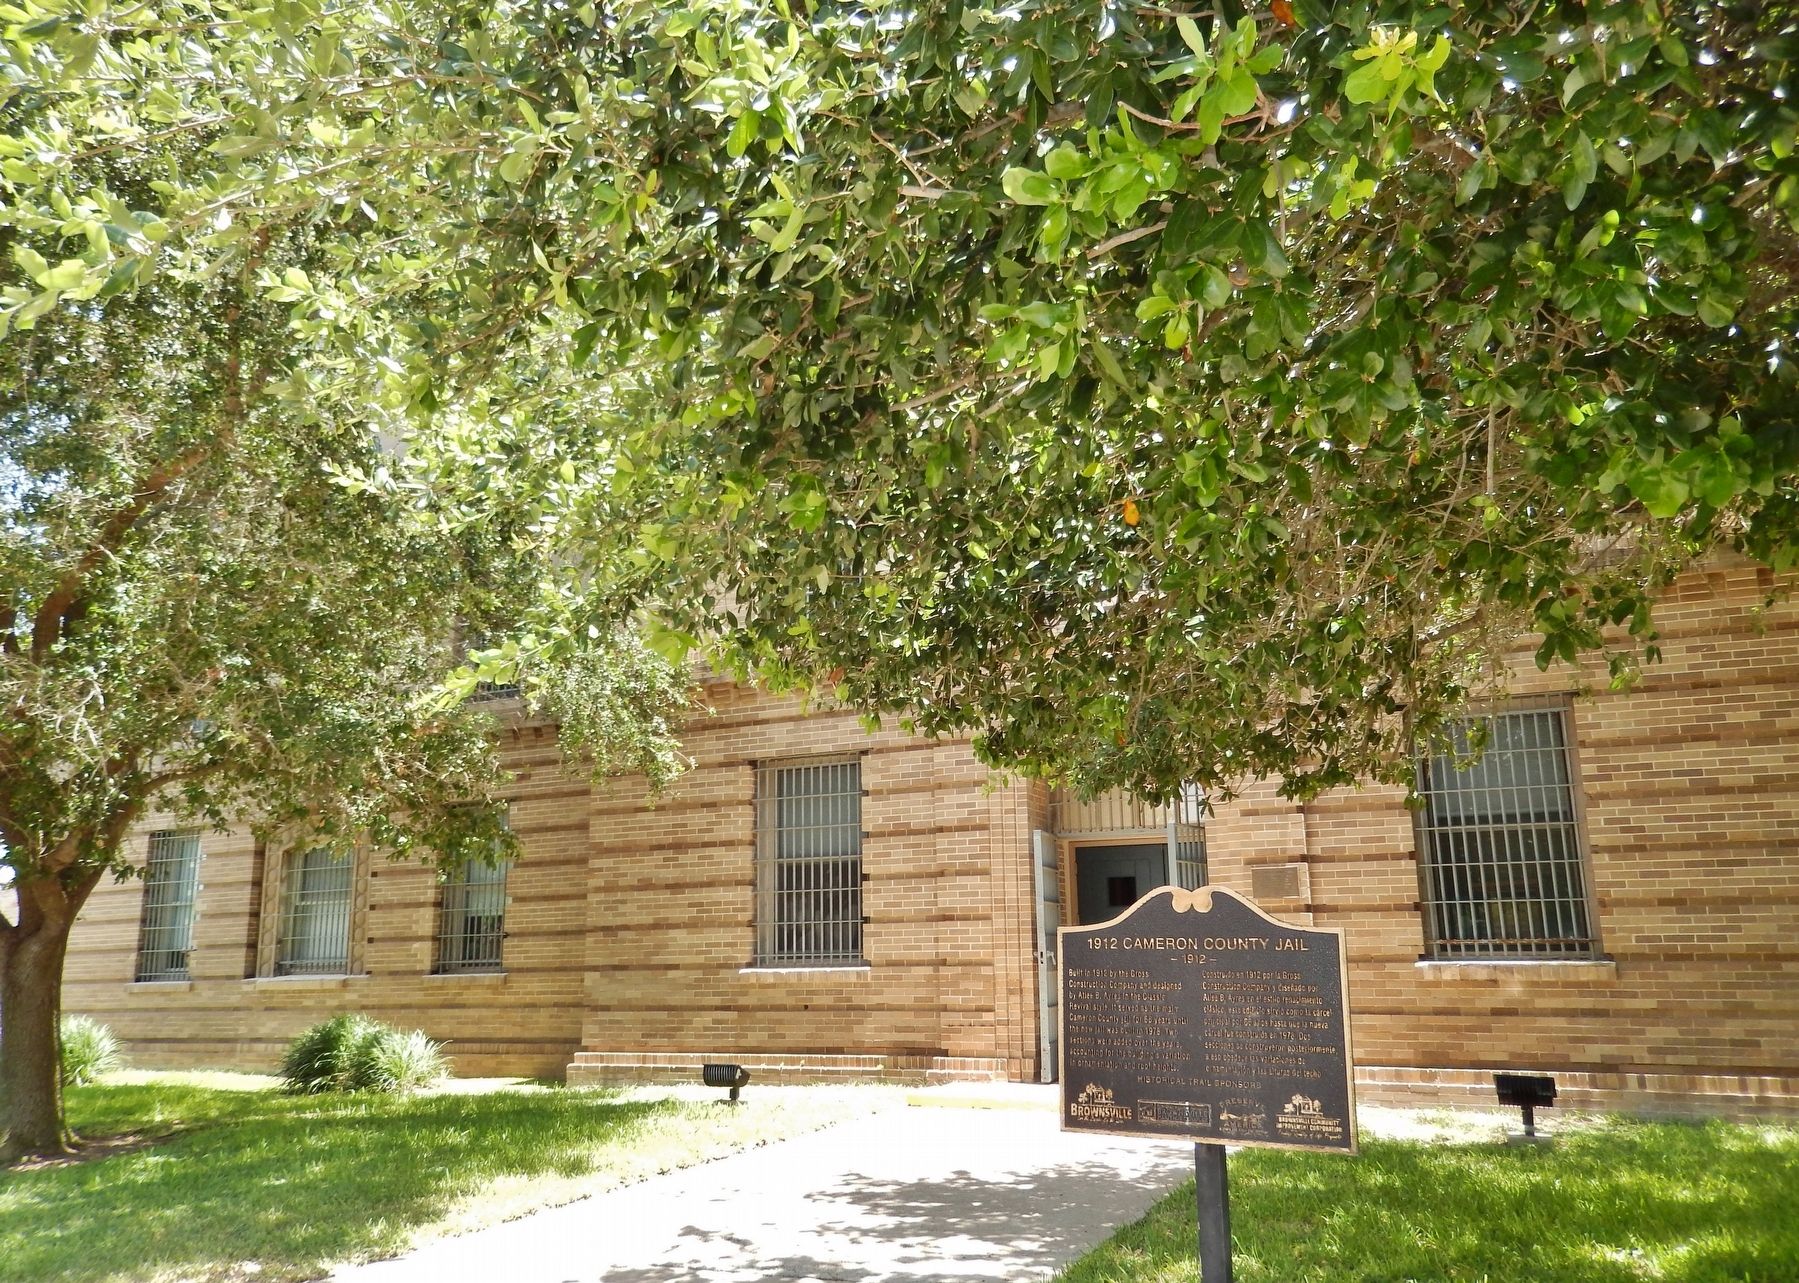 1912 Cameron County Jail Marker (<i>wide view; main entrance in background</i>) image. Click for full size.